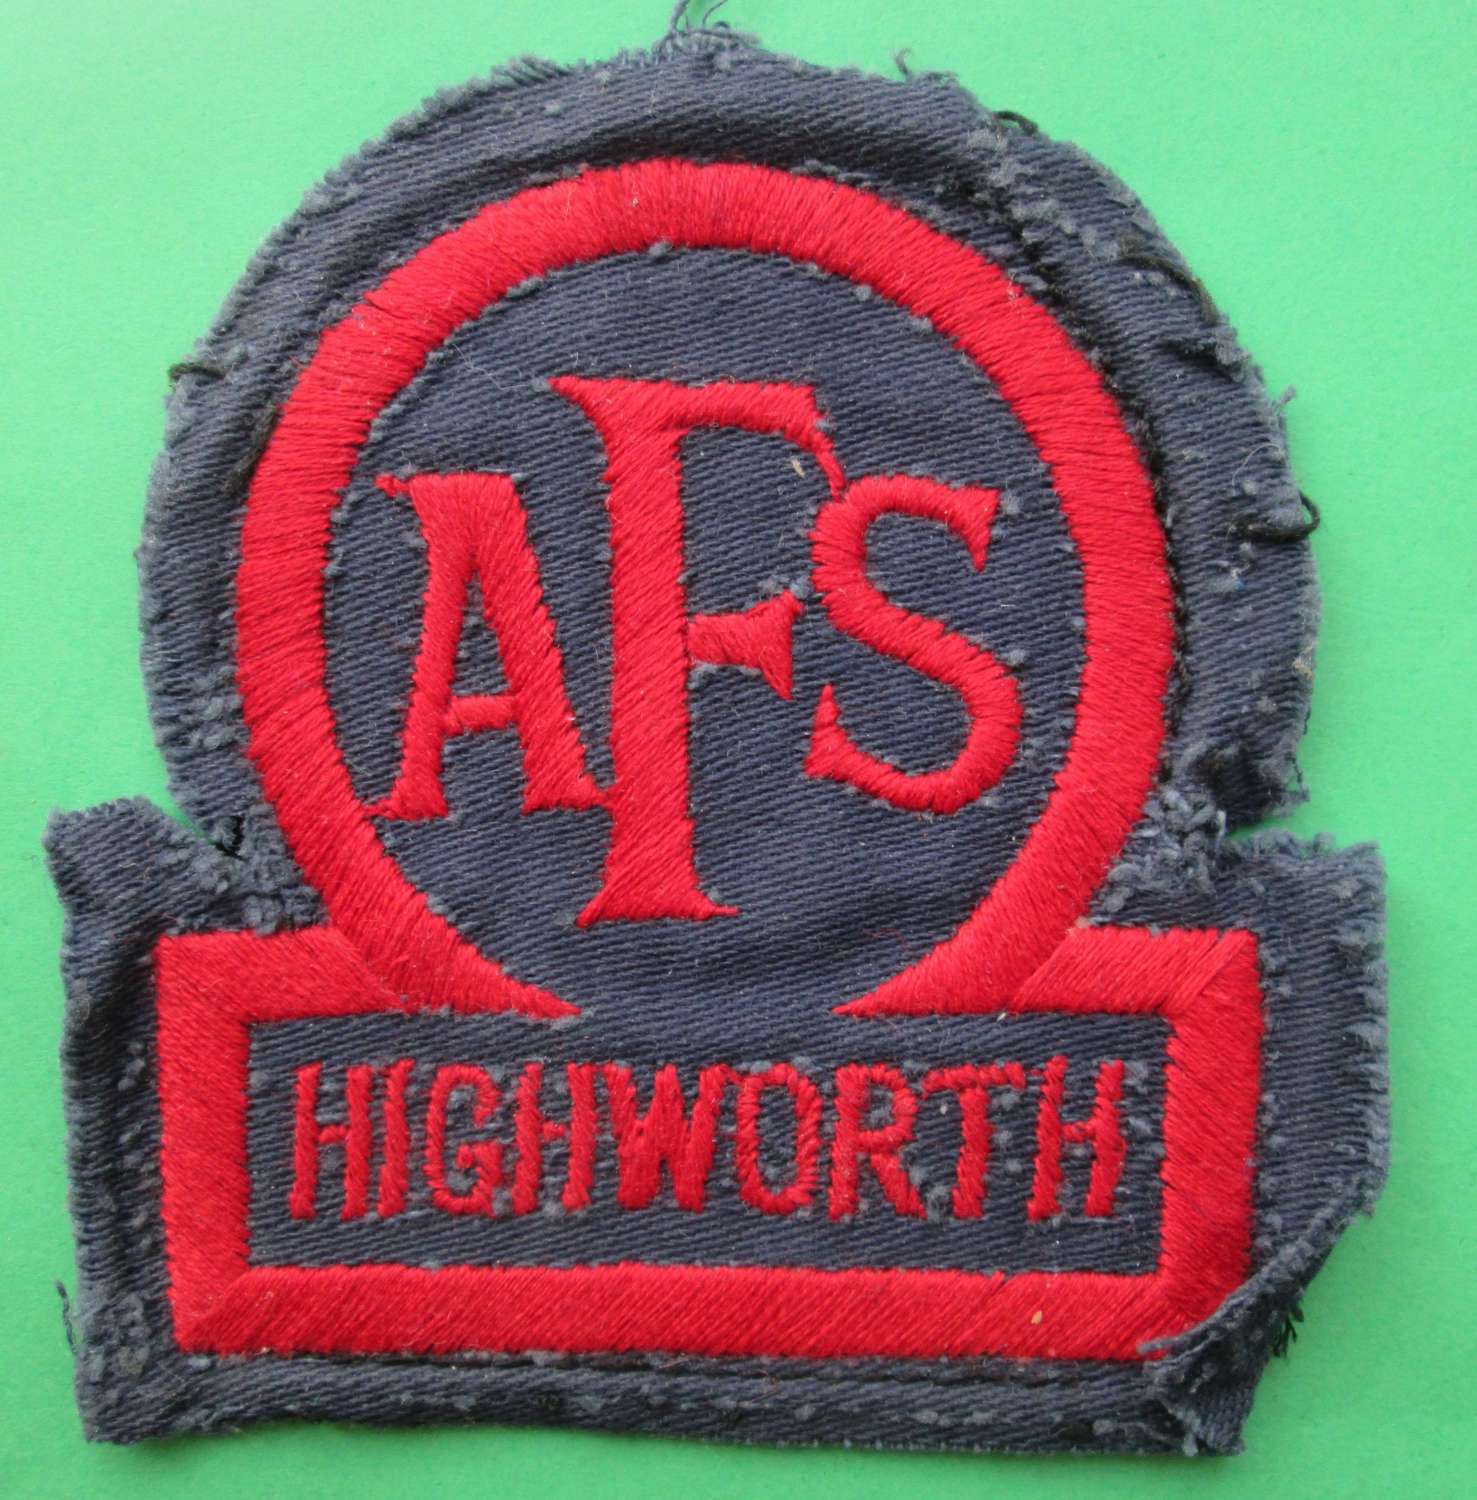 AN AUXILLARY FIRE SERVICE BADGE FOR HIGHWORTH